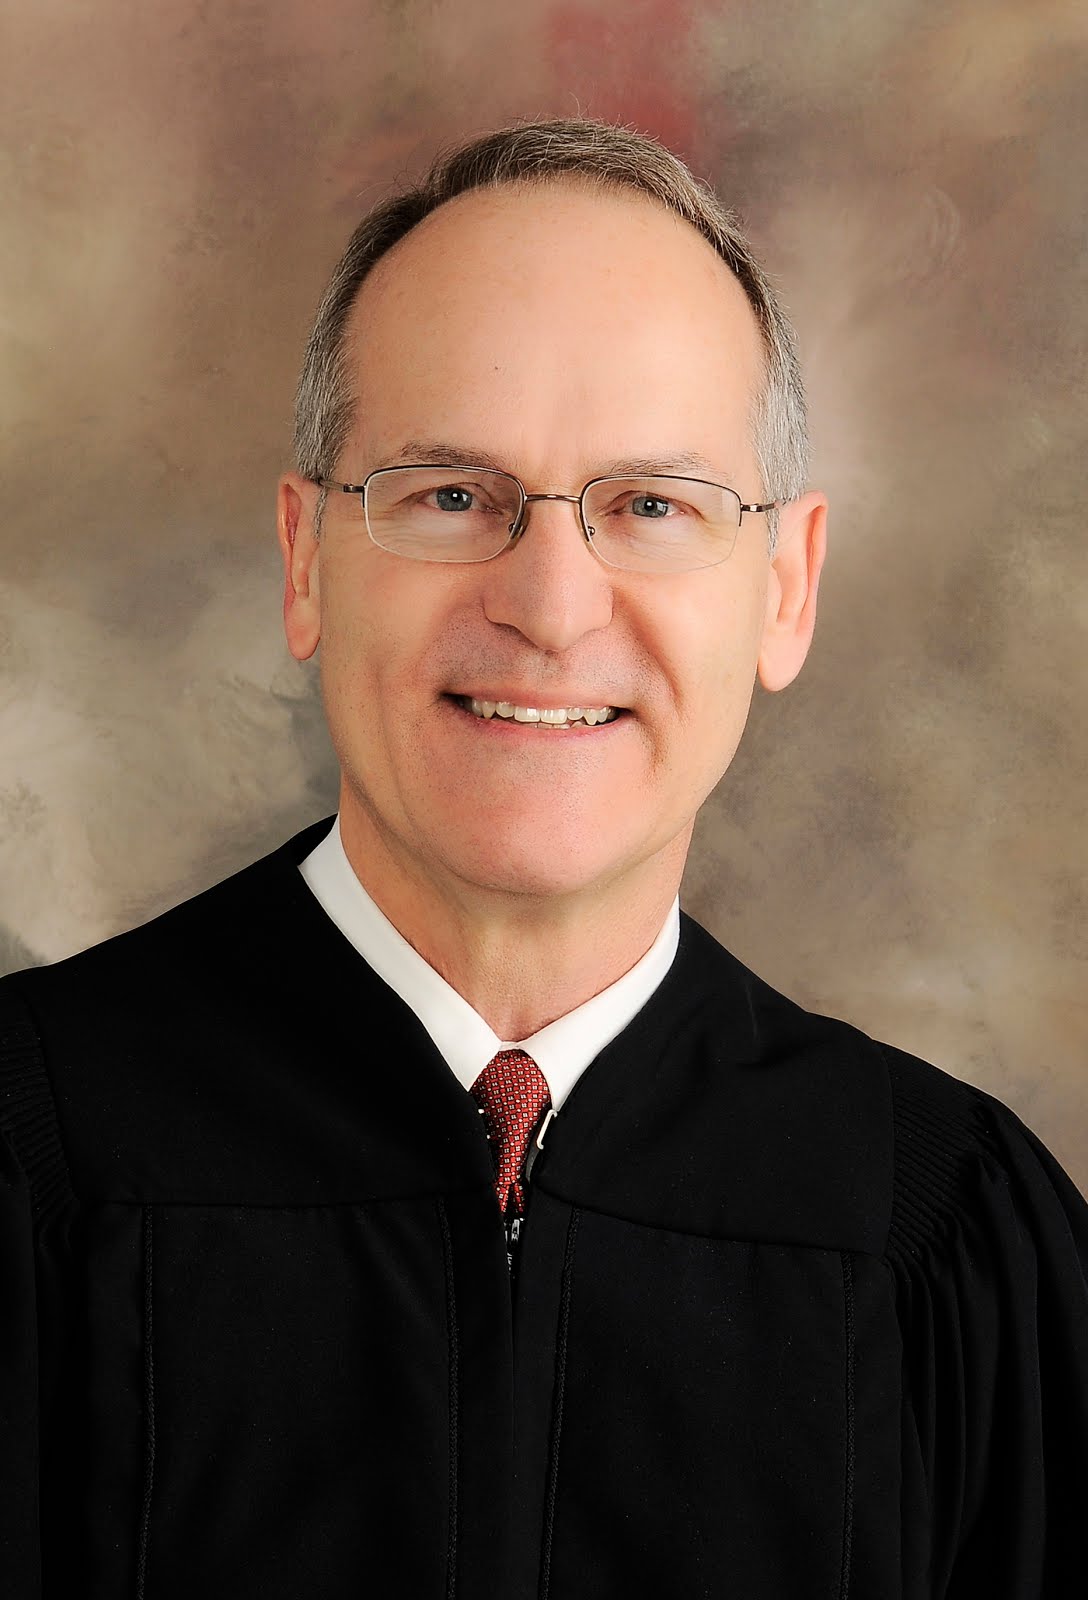 Judge Anderson Announce Intent to Run for District Judge, 28th District 